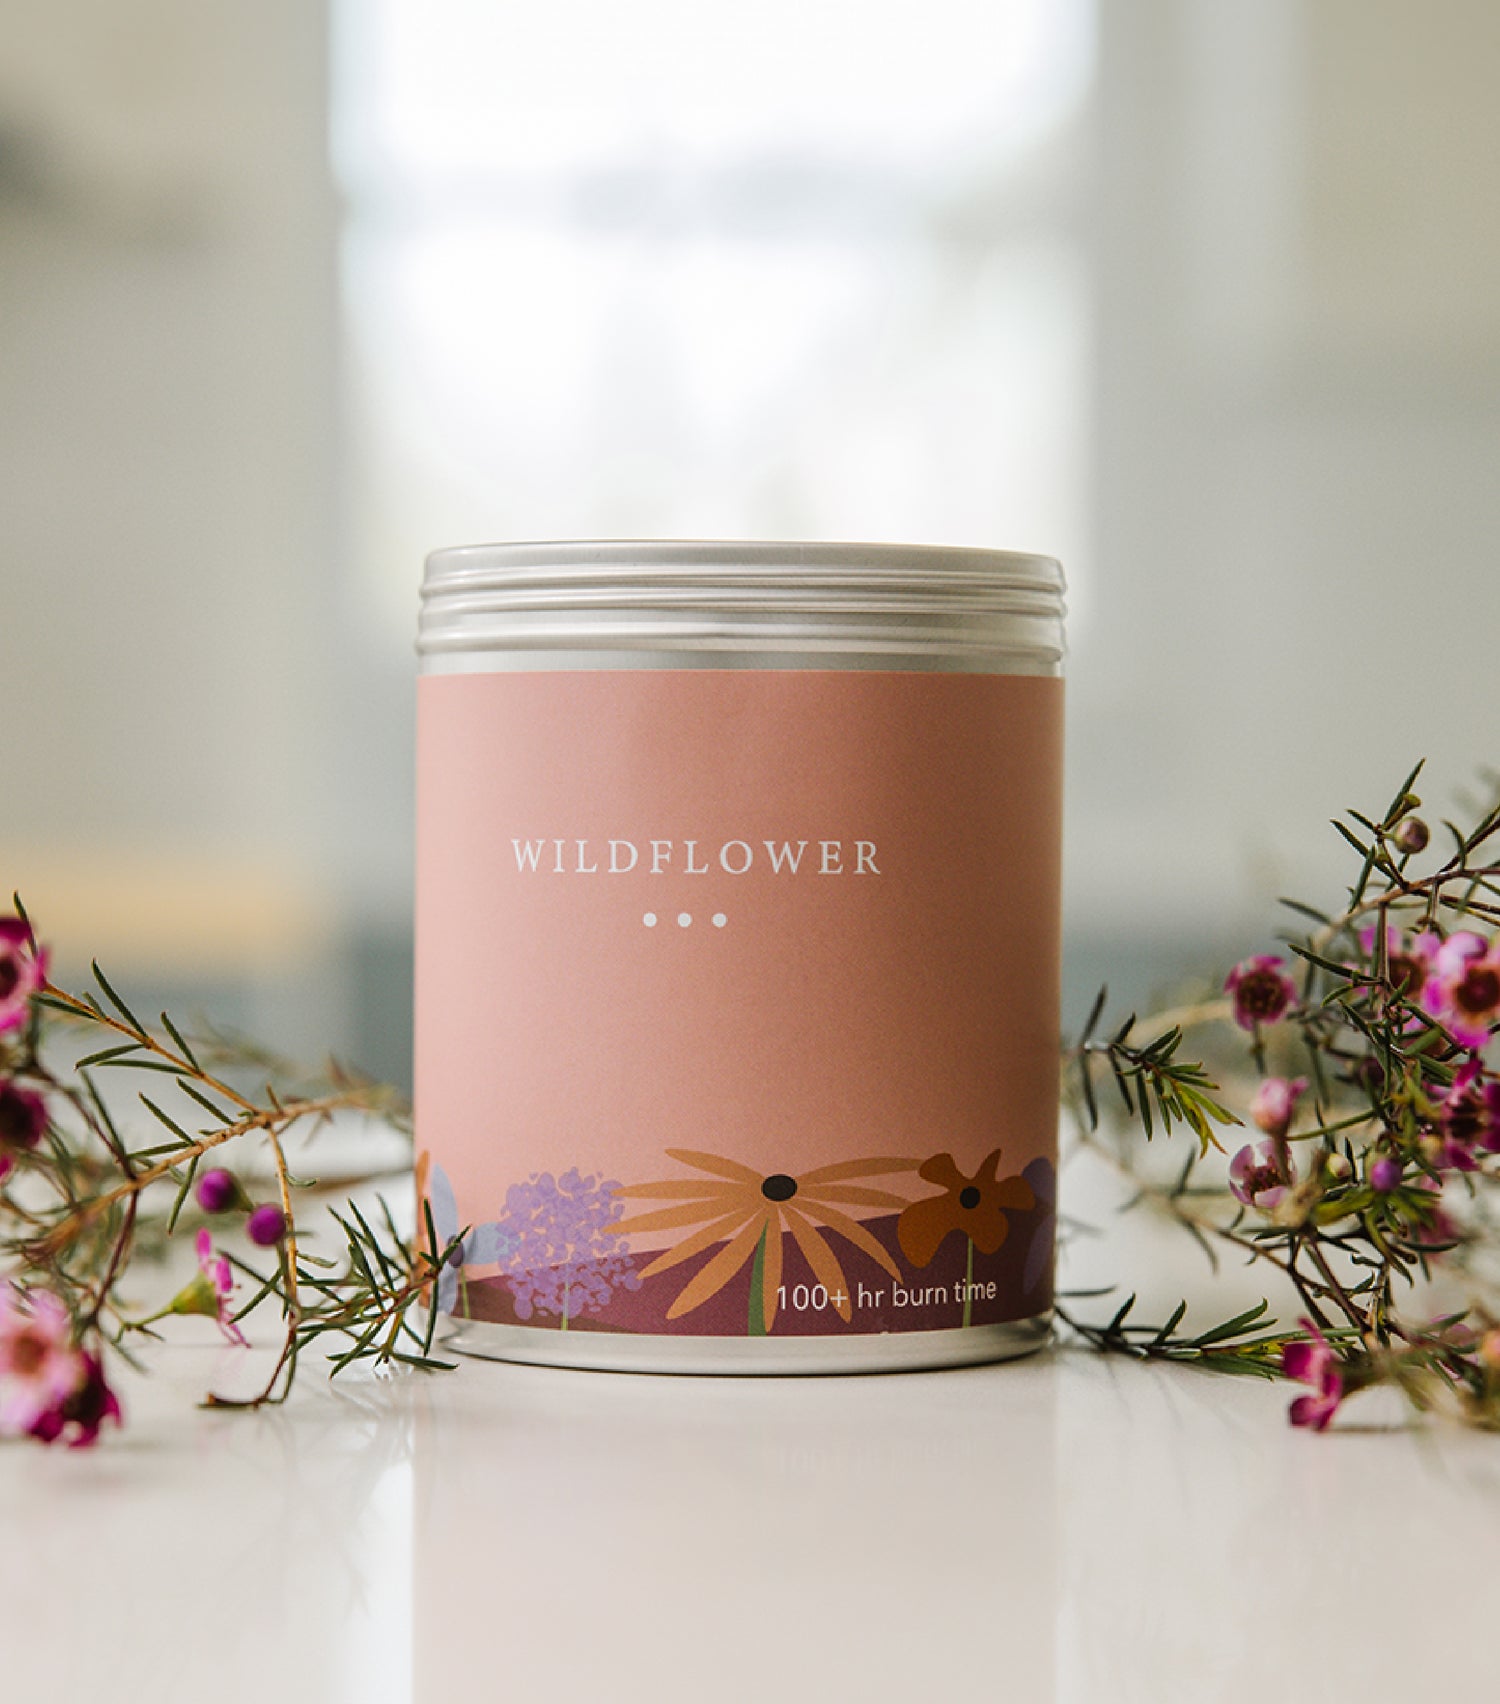 A Large Pink Tin With Wildflowers on the side. Made in The USA In Kalamazoo, MI. Scented with Citrus, Florals, and Vanilla.